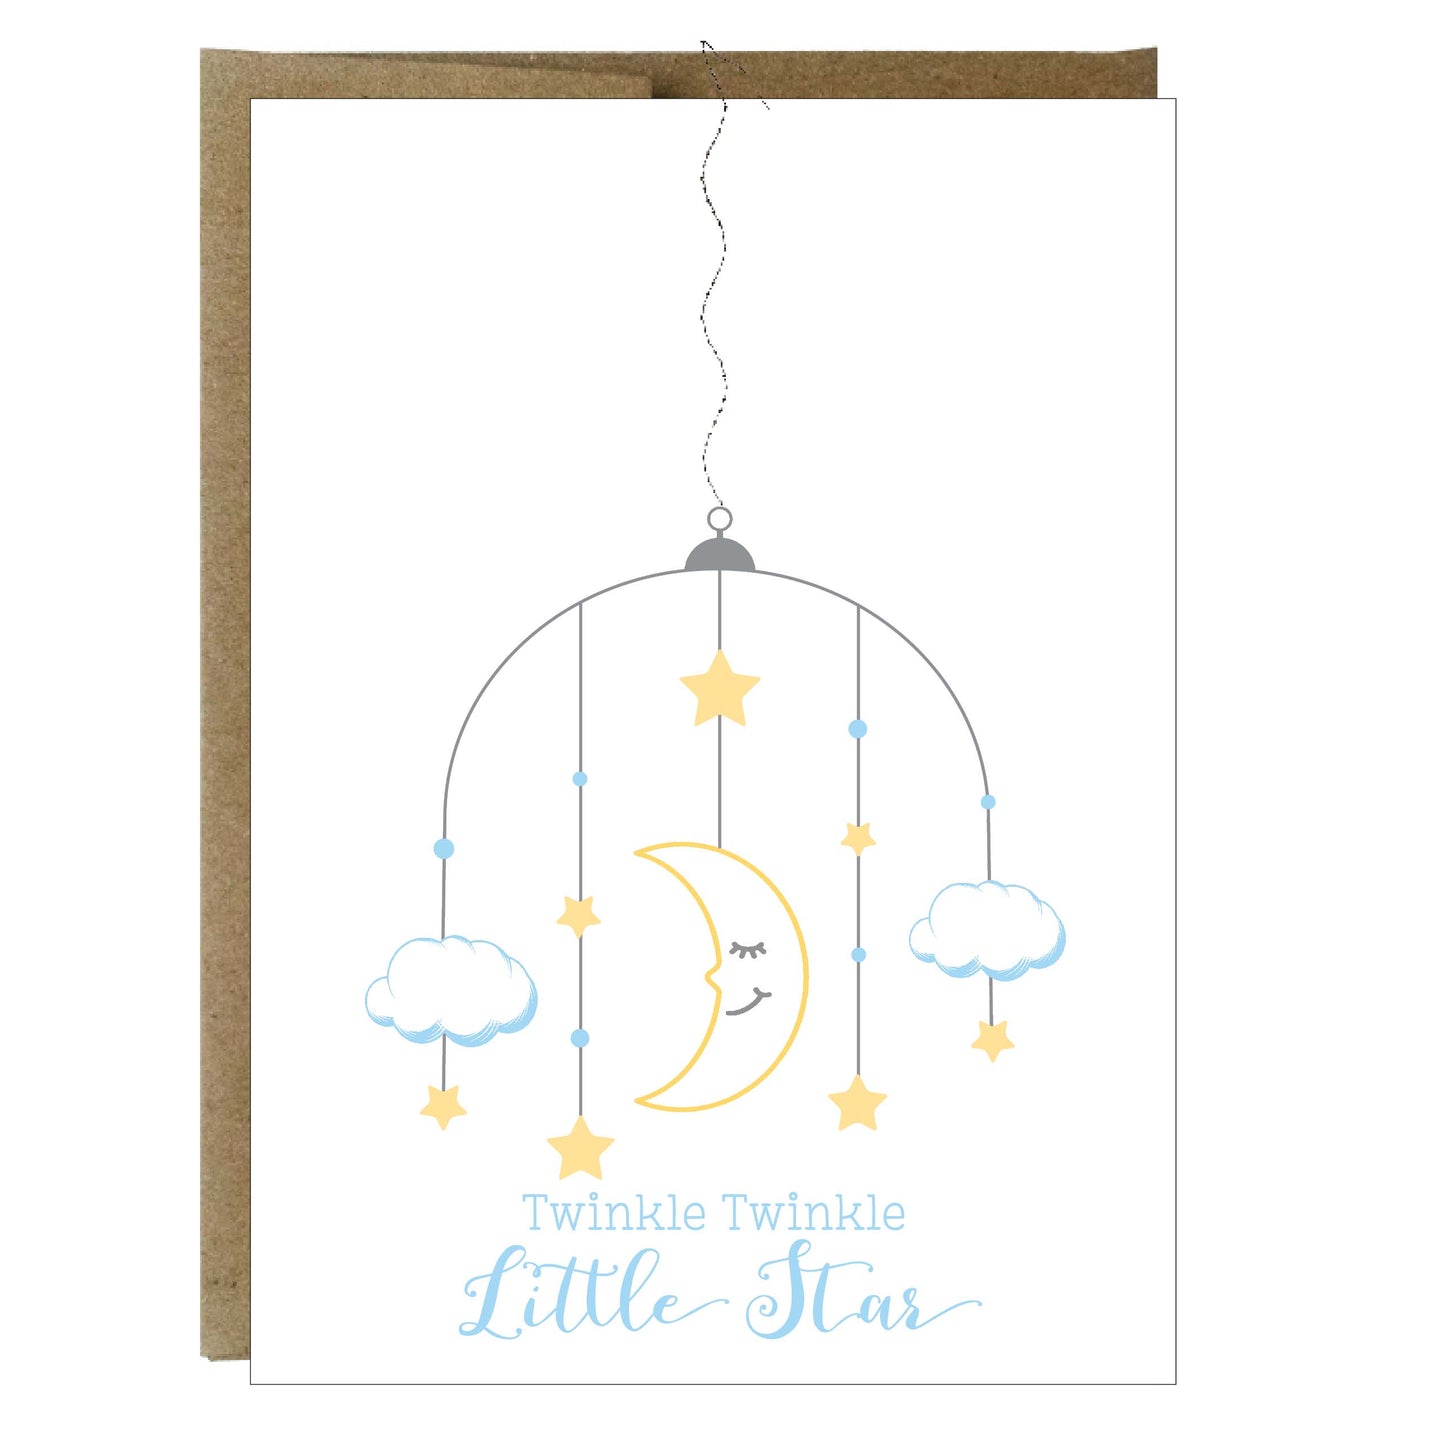 Twinkle Twinkle Little Star Baby Greeting Card with Sewn Paper - Idea Chíc